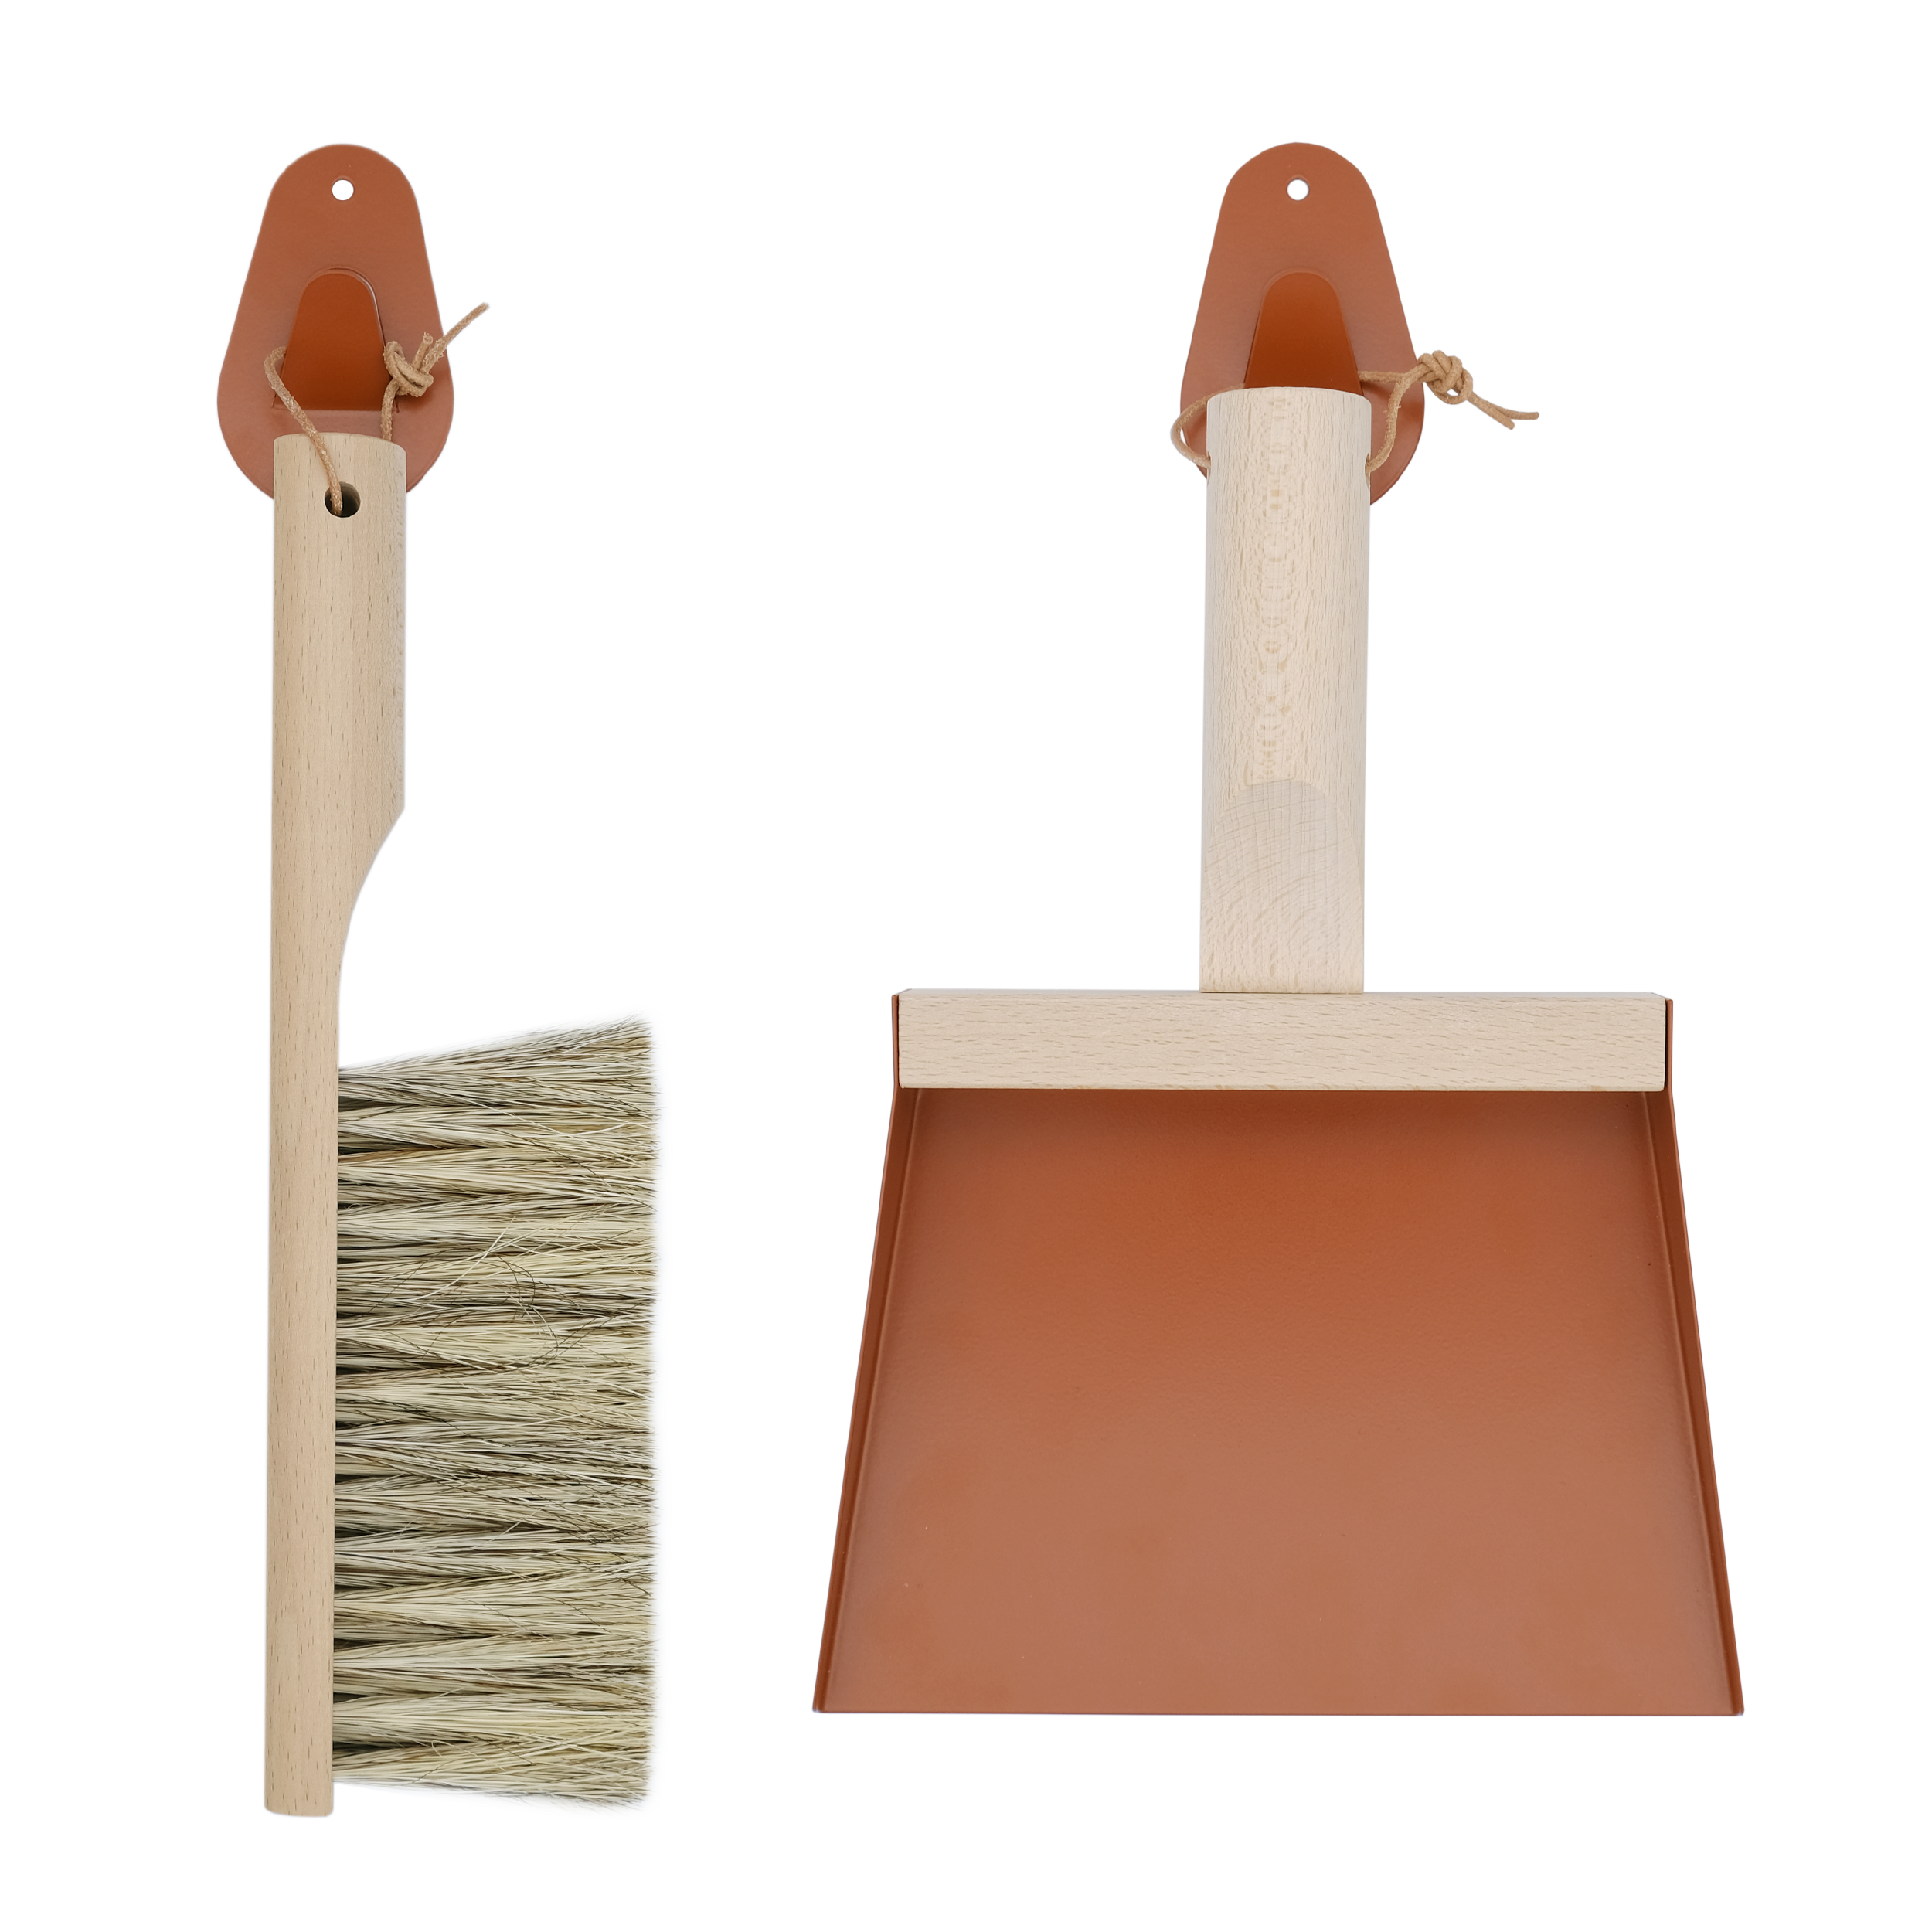 Andrée Jardin Mr. and Mrs. Clynk Dustpan & Natural Brush with Wall Hooks Set "Coffret" Gift Set Brick Red Utilities Andrée Jardin Back in stock Brand_Andrée Jardin Home_Broom Sets Home_Household Cleaning New Arrivals coffret-crochets-pelle-balayette-clynk-nature-3243-PNG